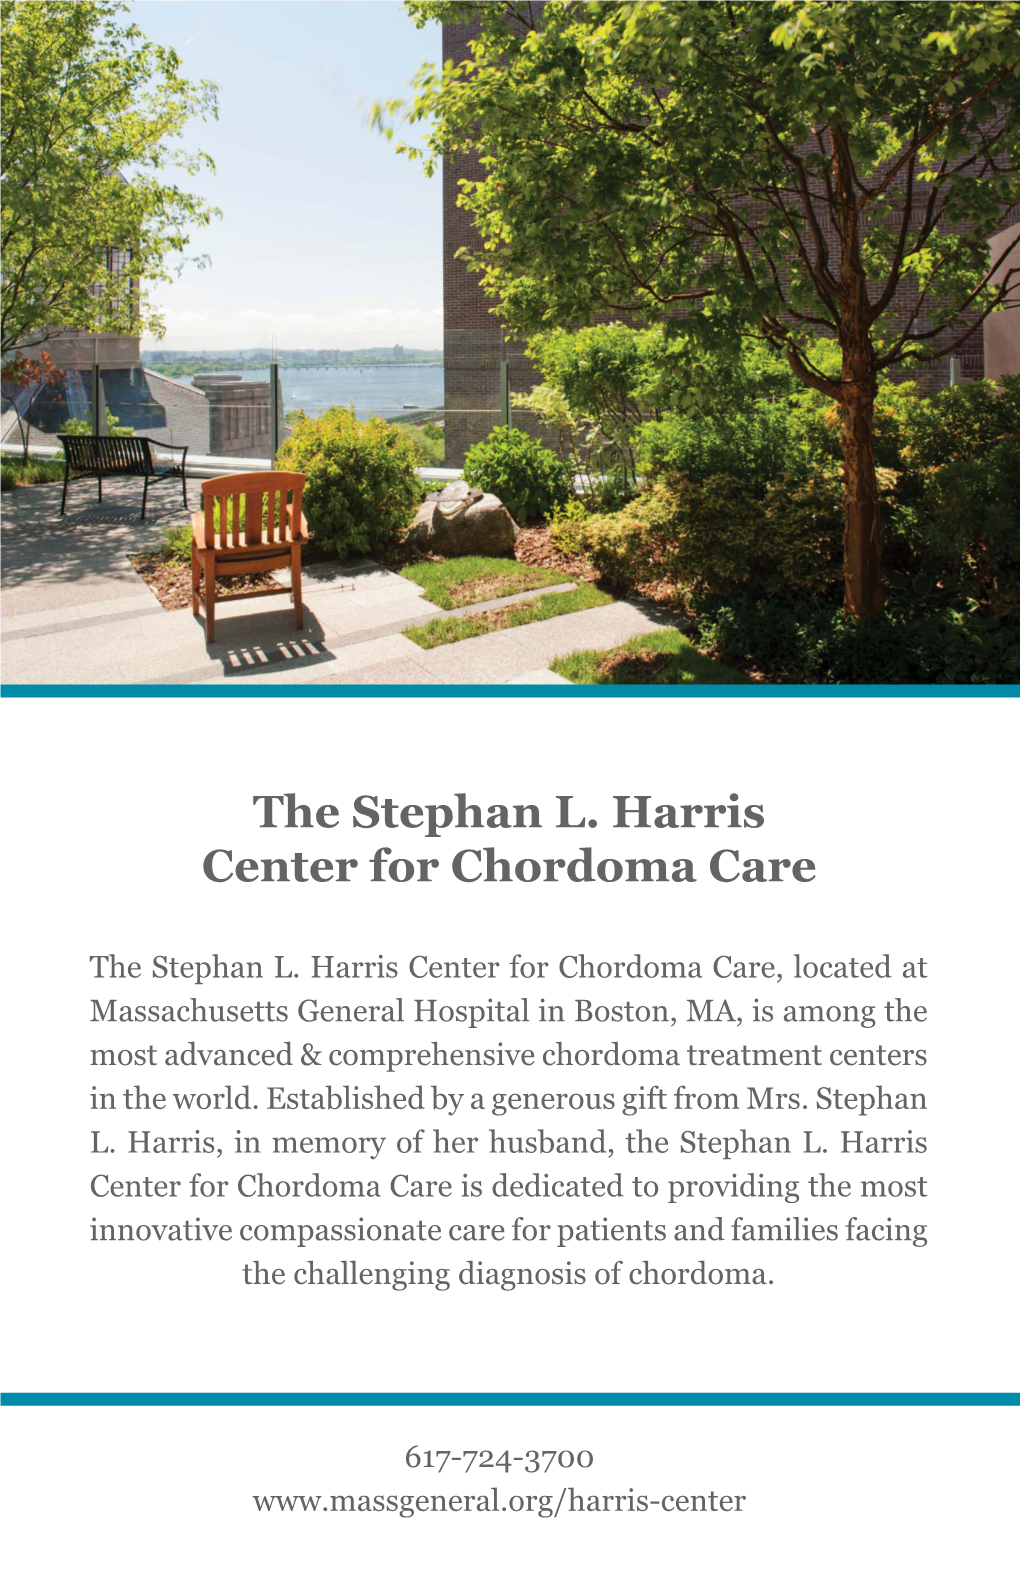 The Stephan L. Harris Center for Chordoma Care